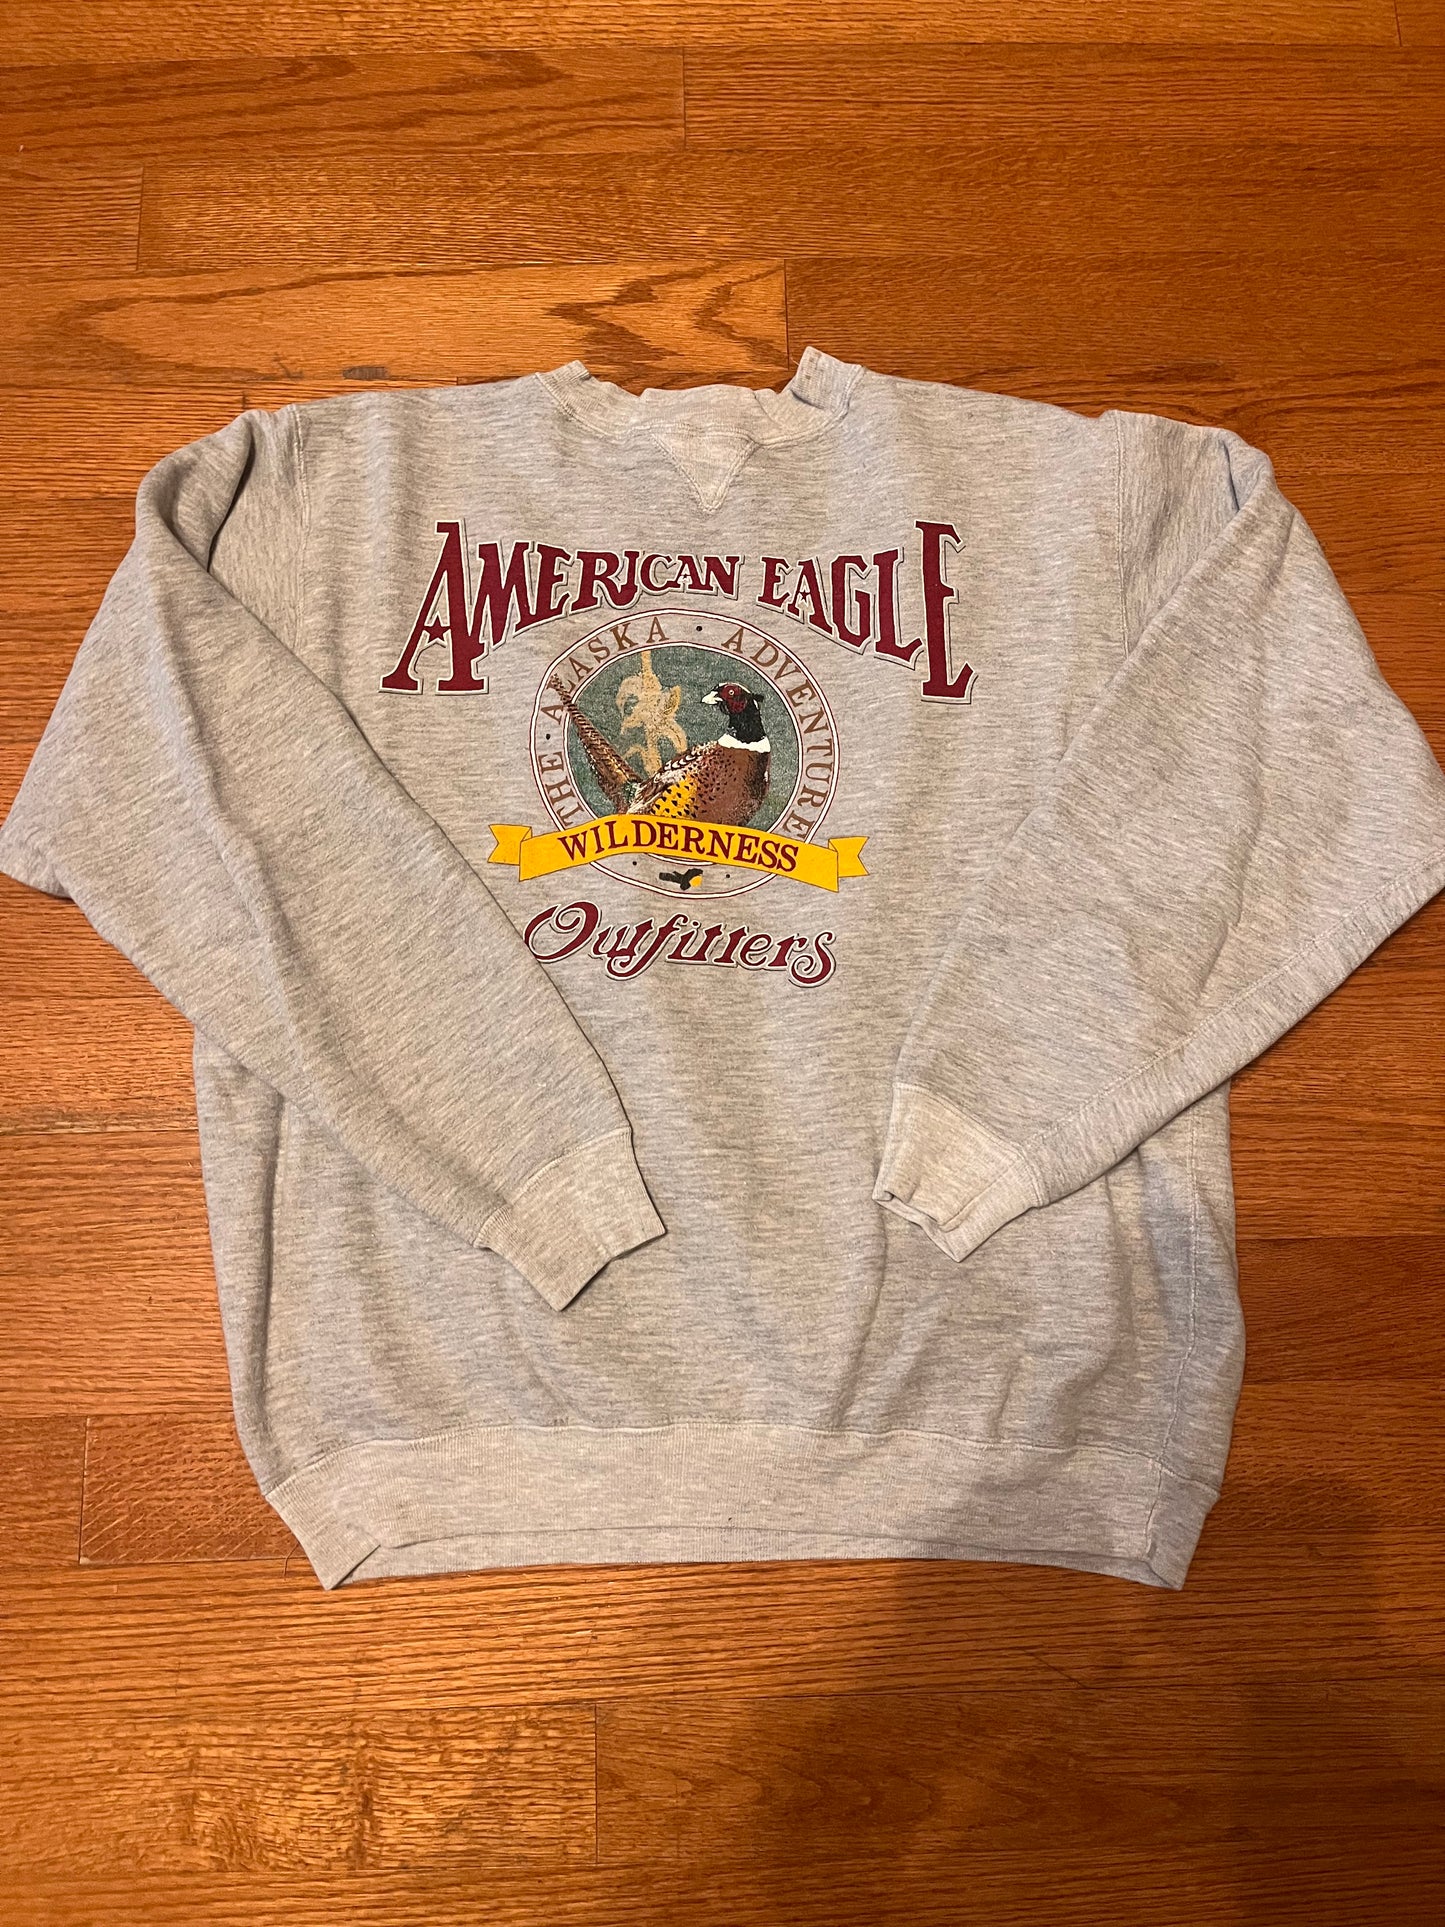 Vintage American Eagle outfitters XL